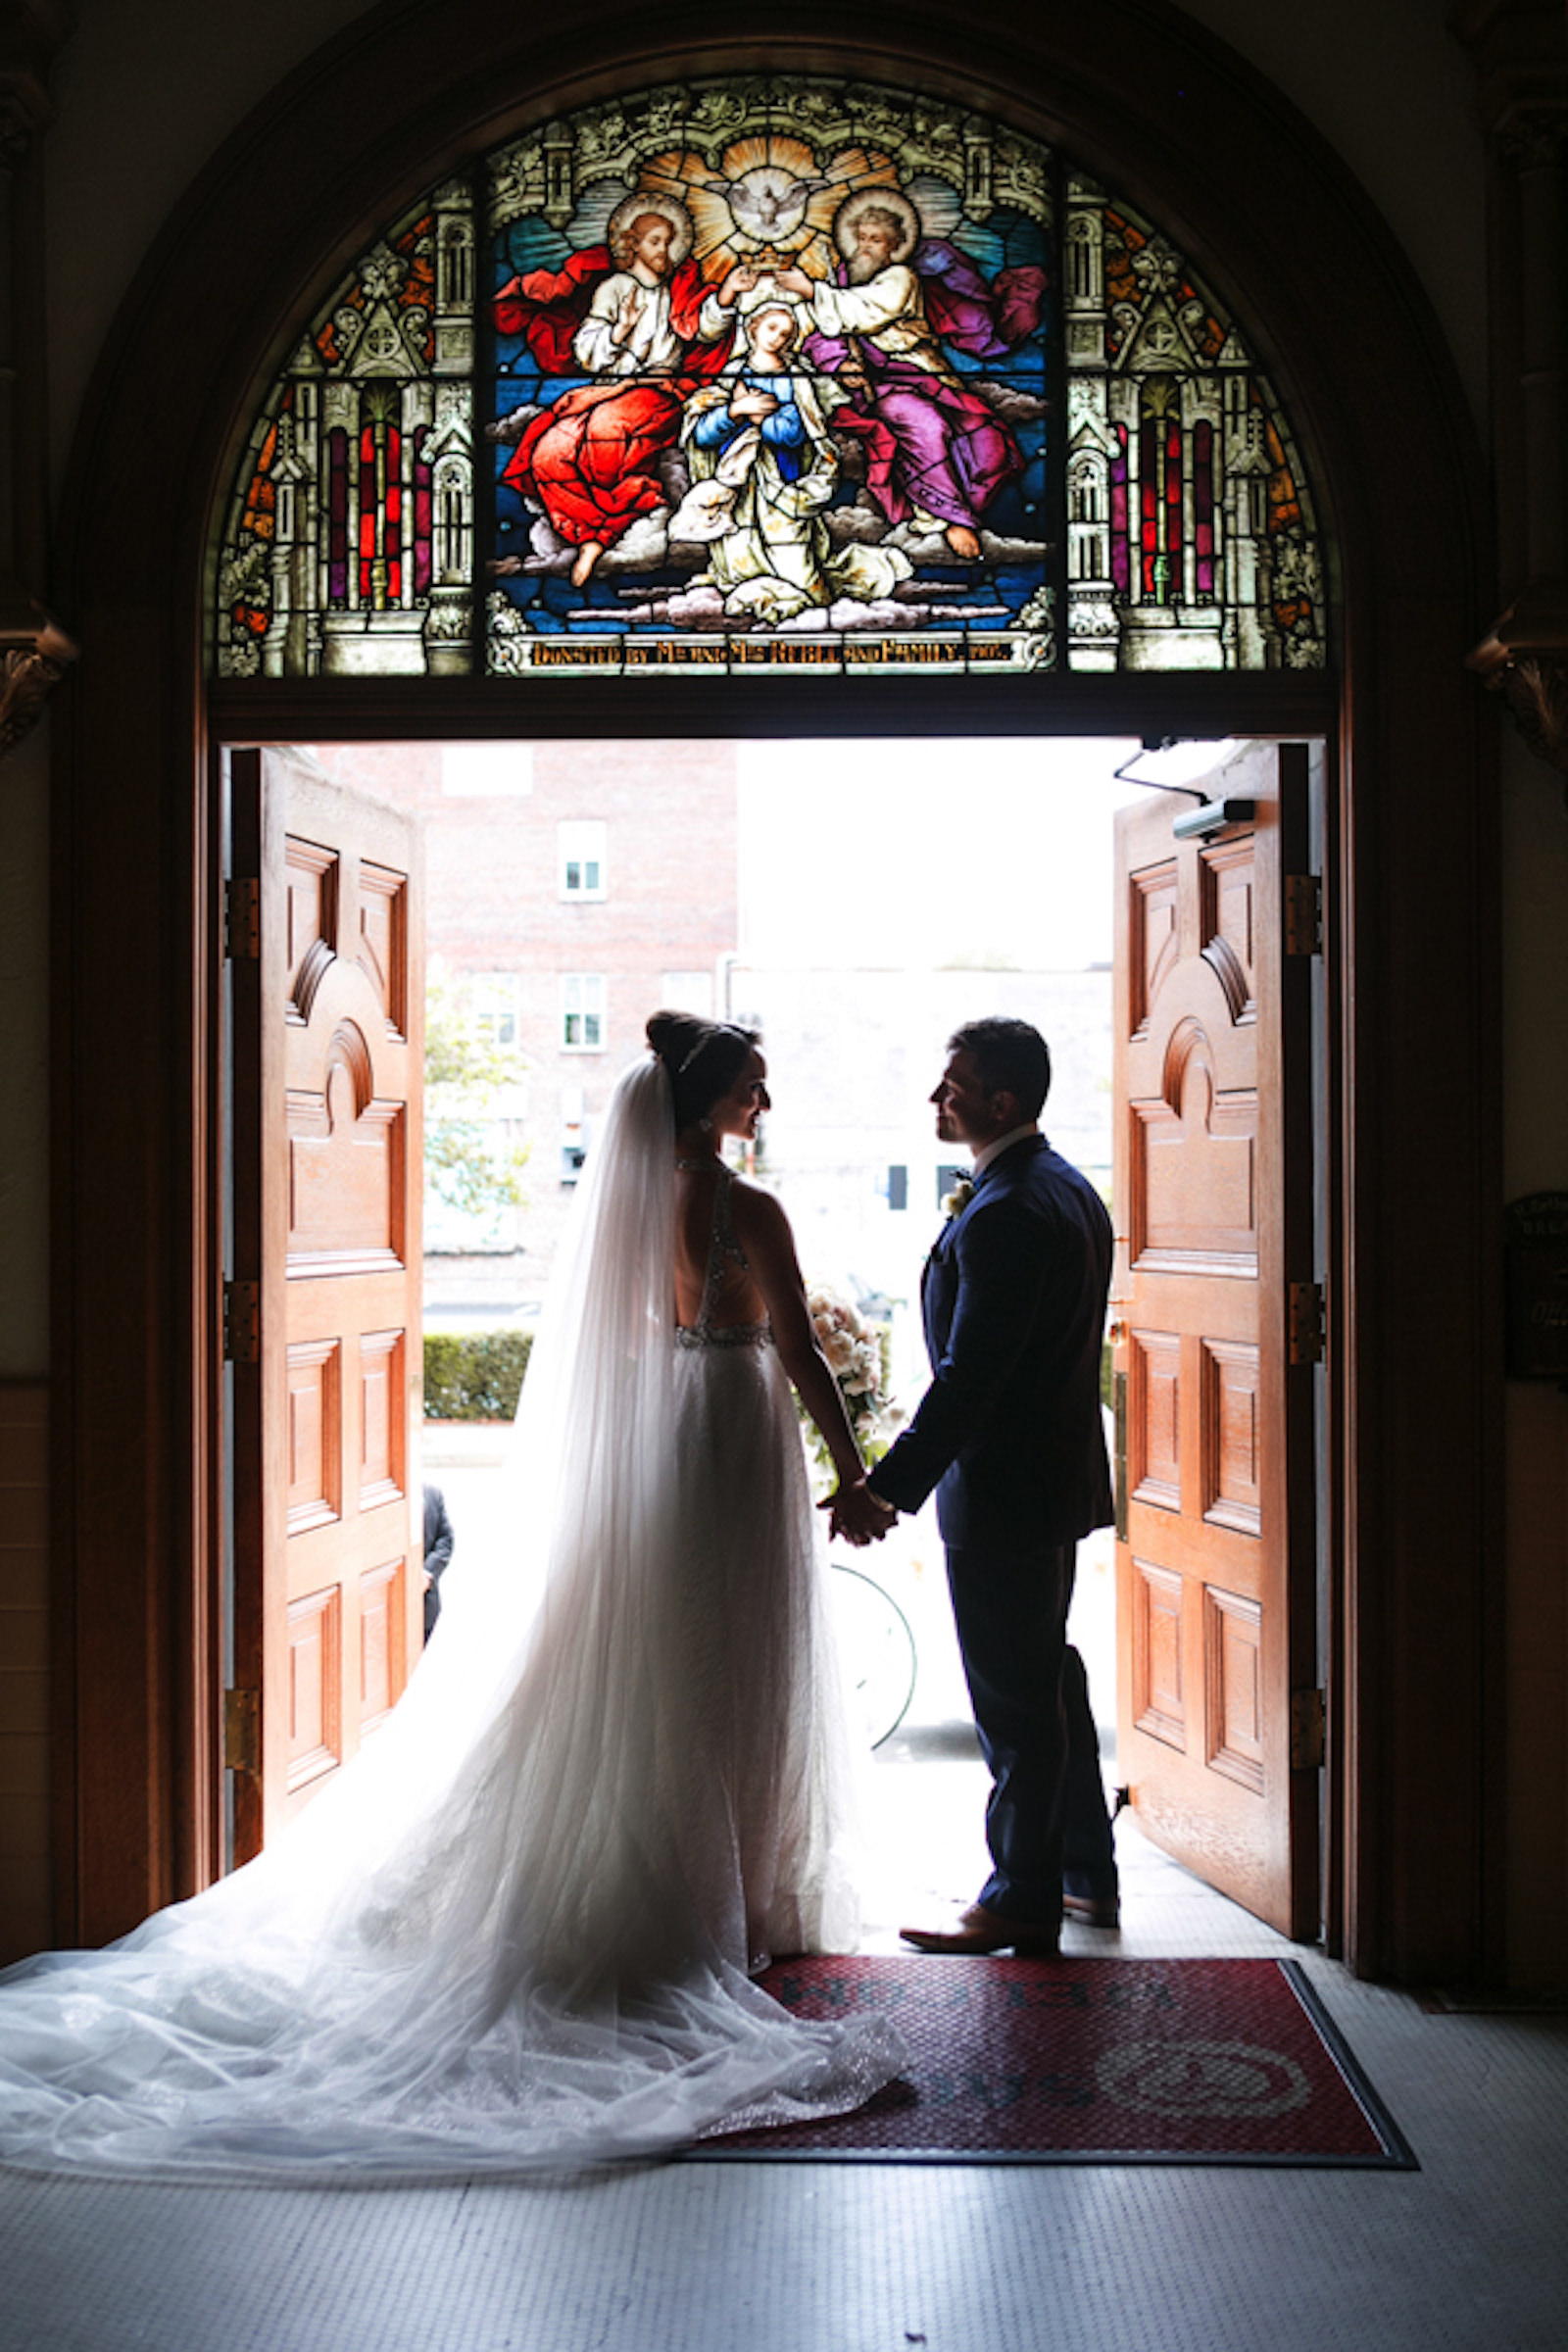 Indoor Downtown Tampa Bride and Groom Portrait at Traditional Catholic Ceremony Cathedral Church | V Neck Illusion Lace A Line Ballgown Wedding Dress with Rhinestone Waist Band and Cathedral Veil